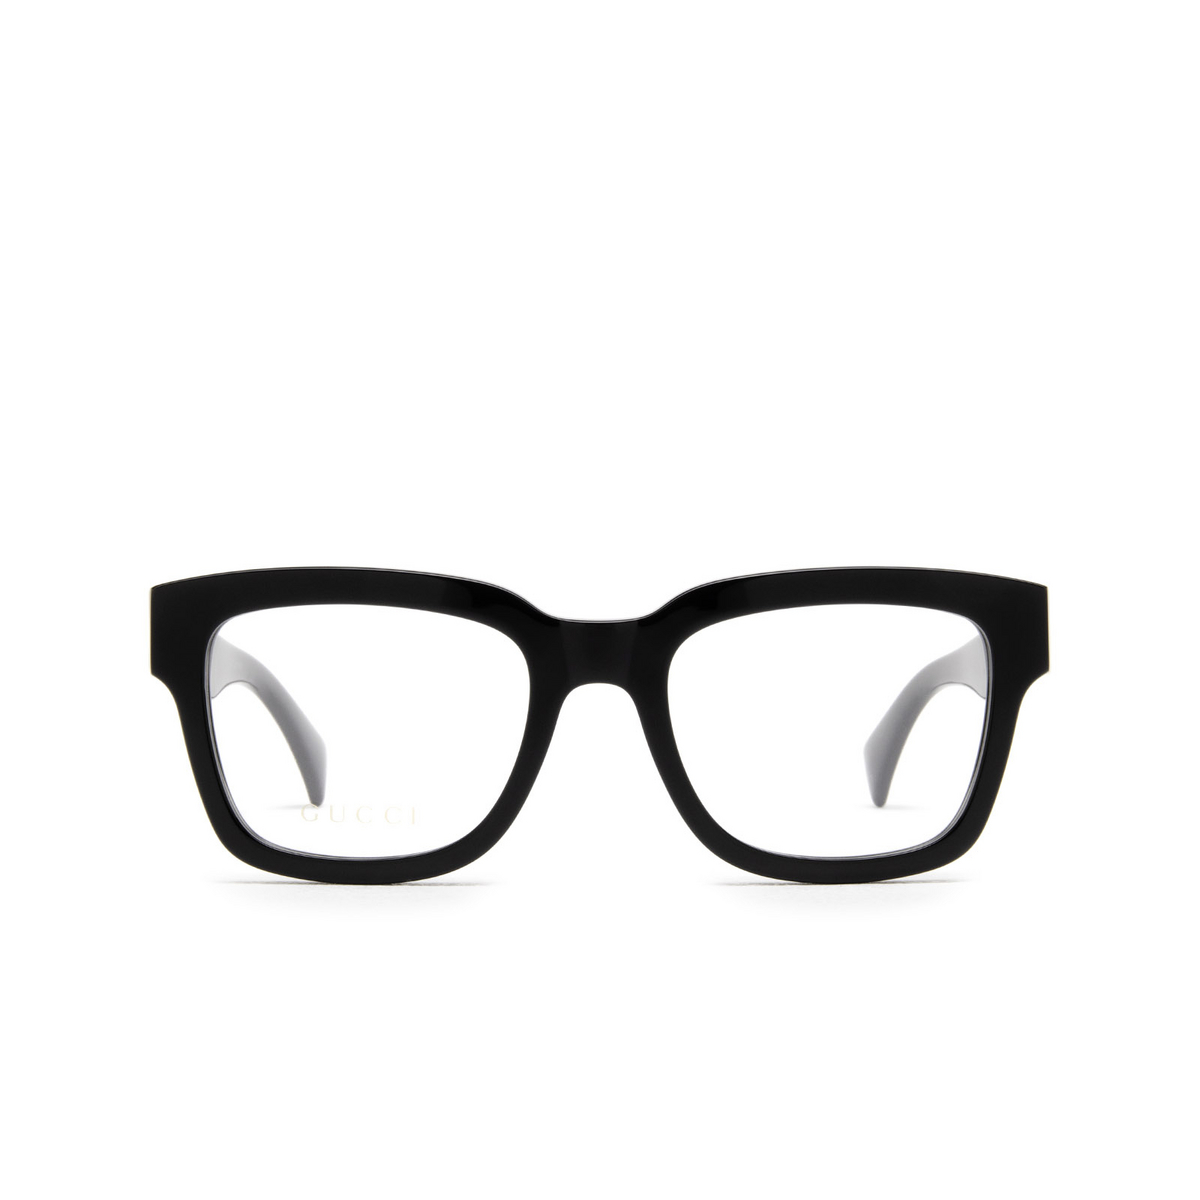 Gucci® Square Eyeglasses: GG1138O color Black 001 - front view.